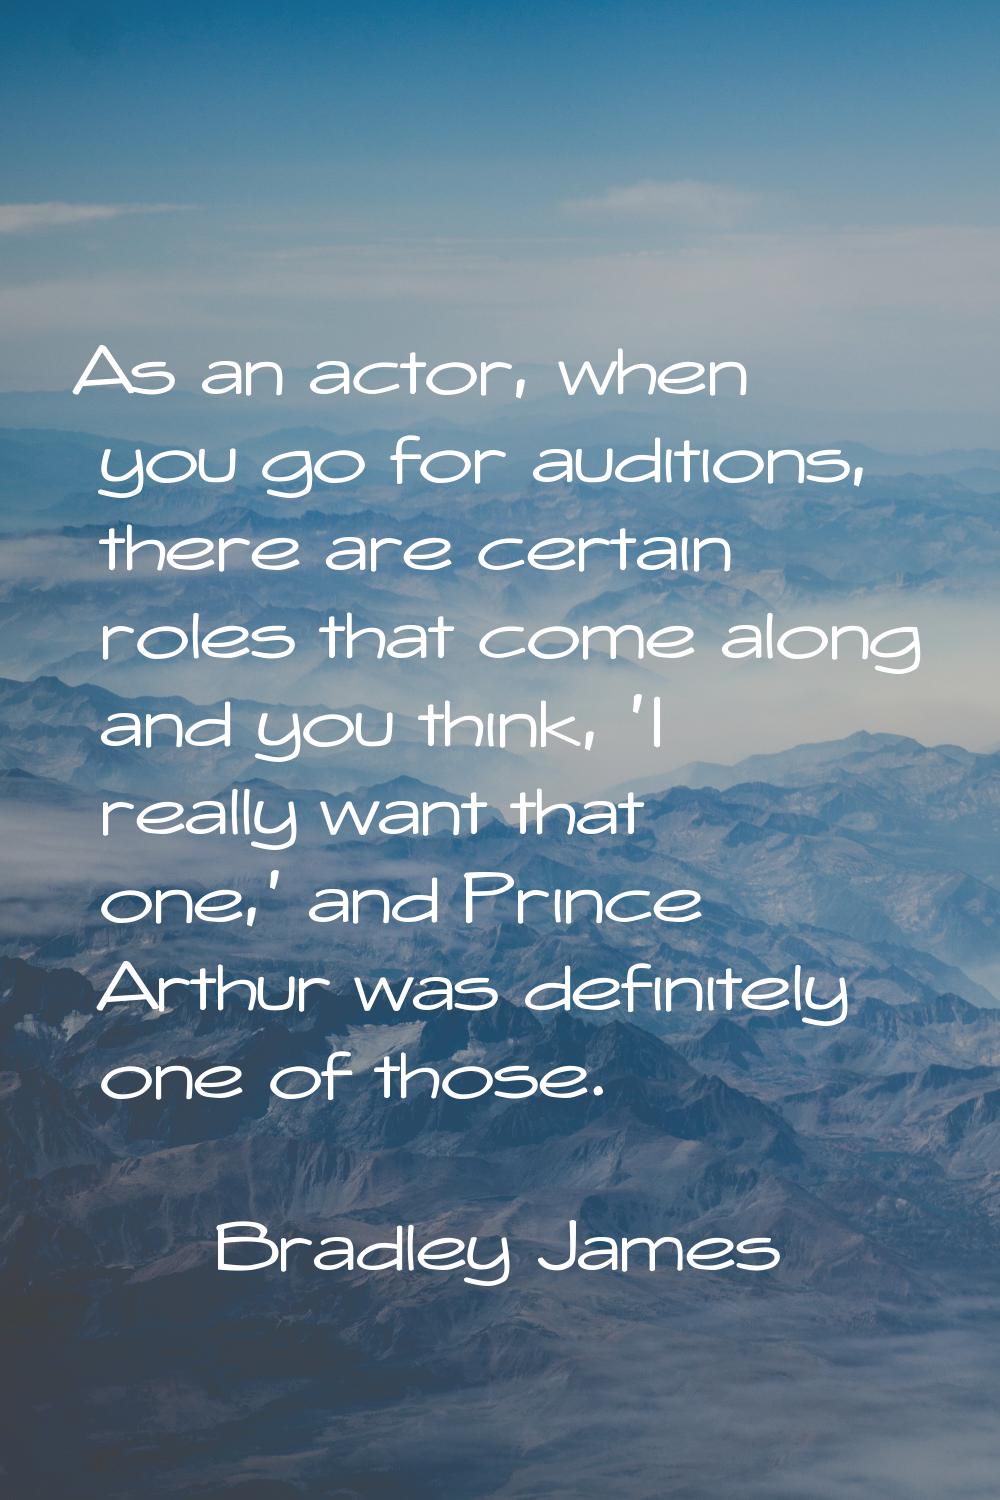 As an actor, when you go for auditions, there are certain roles that come along and you think, 'I r